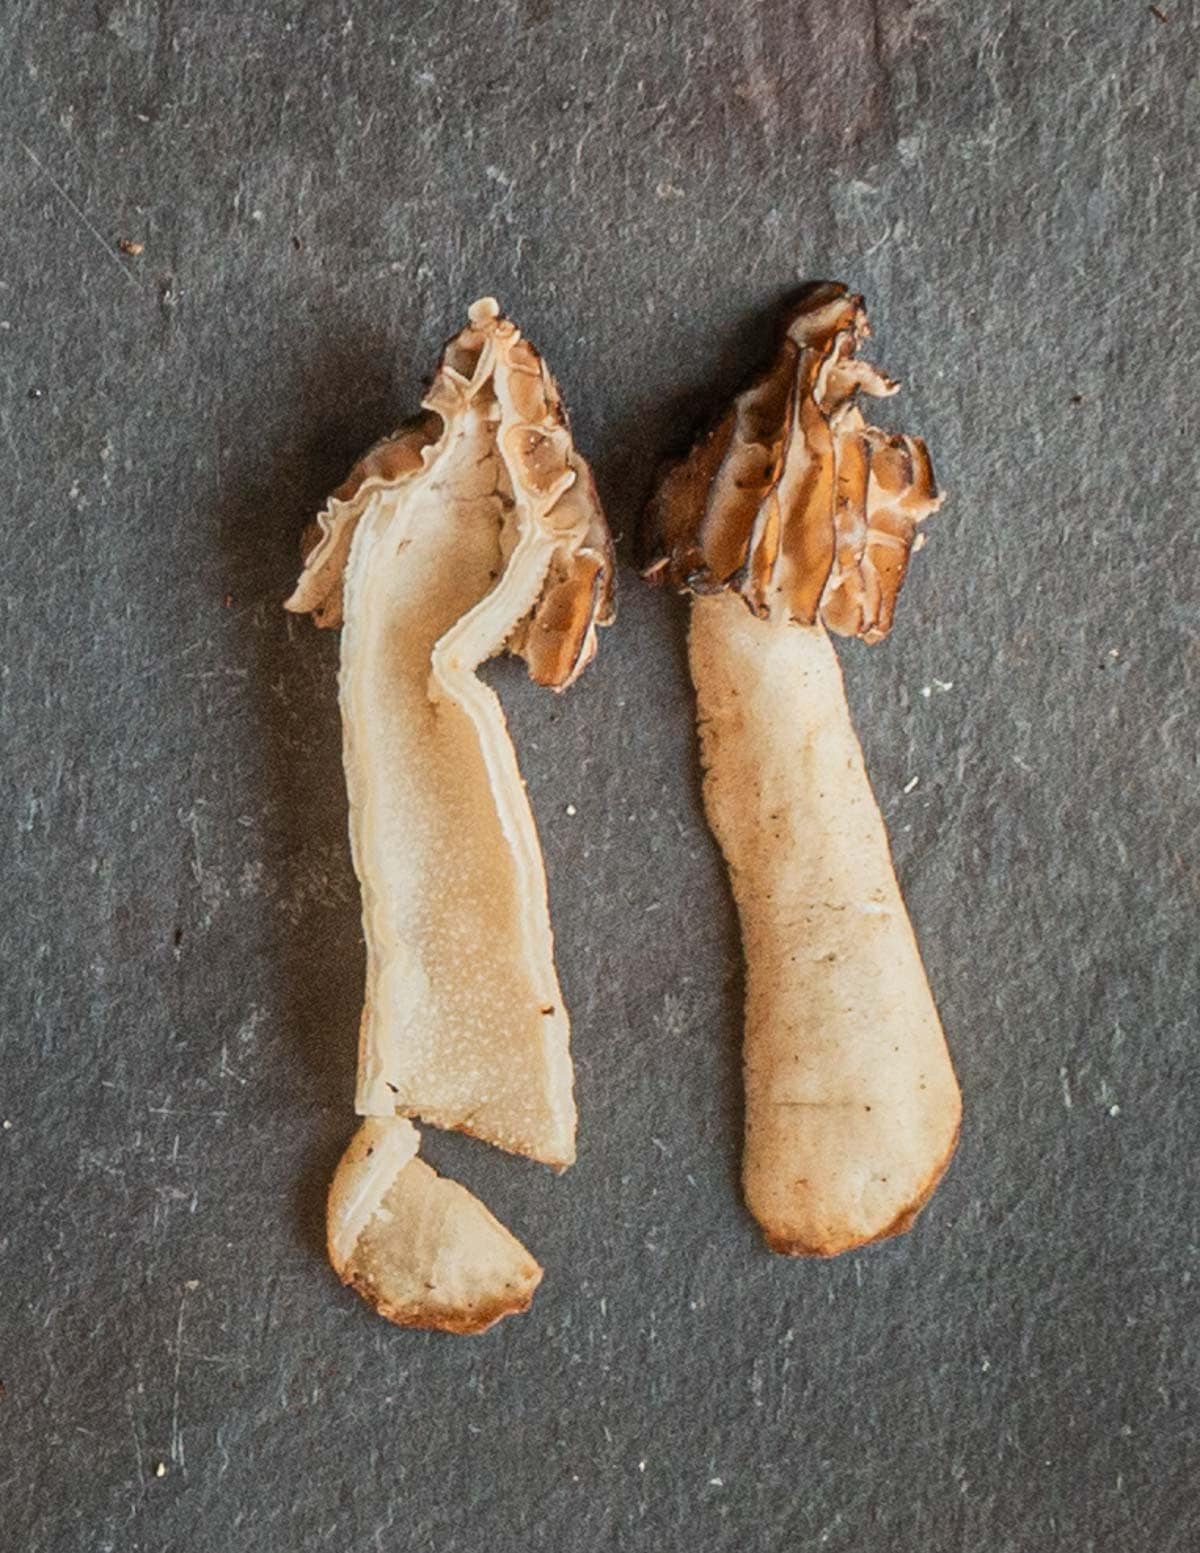 Half free morels cut in half to show how the cap connects at a half way point for identification